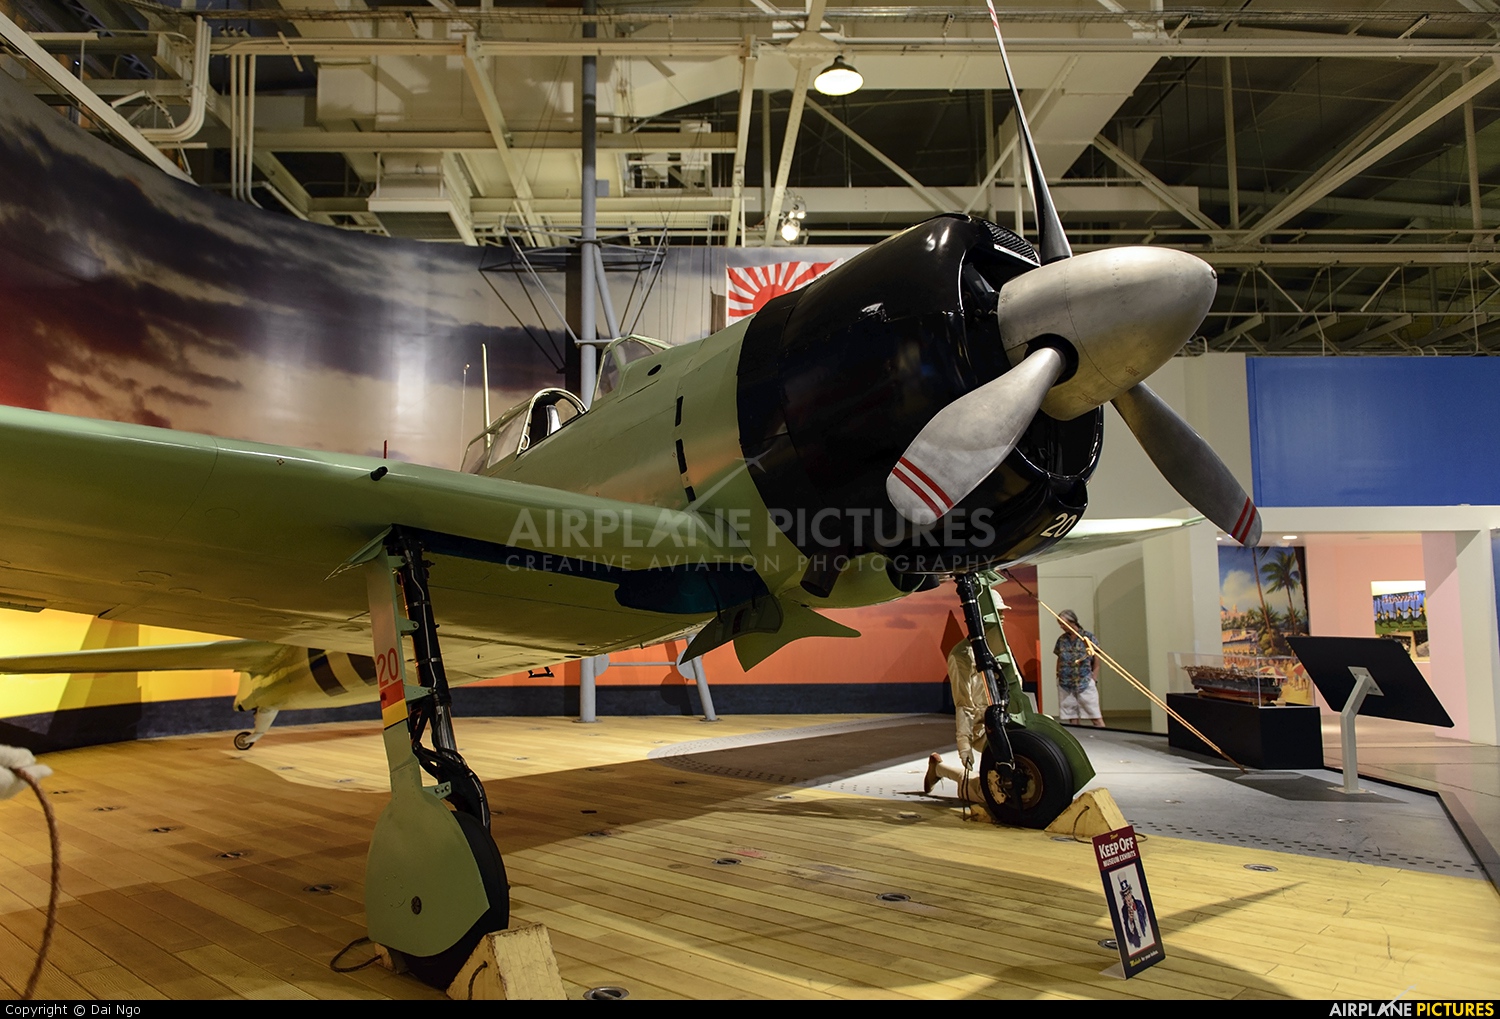 Japan - Imperial Navy (WW2) B11-120 aircraft at Pacific Aviation Museum - Pearl Harbor